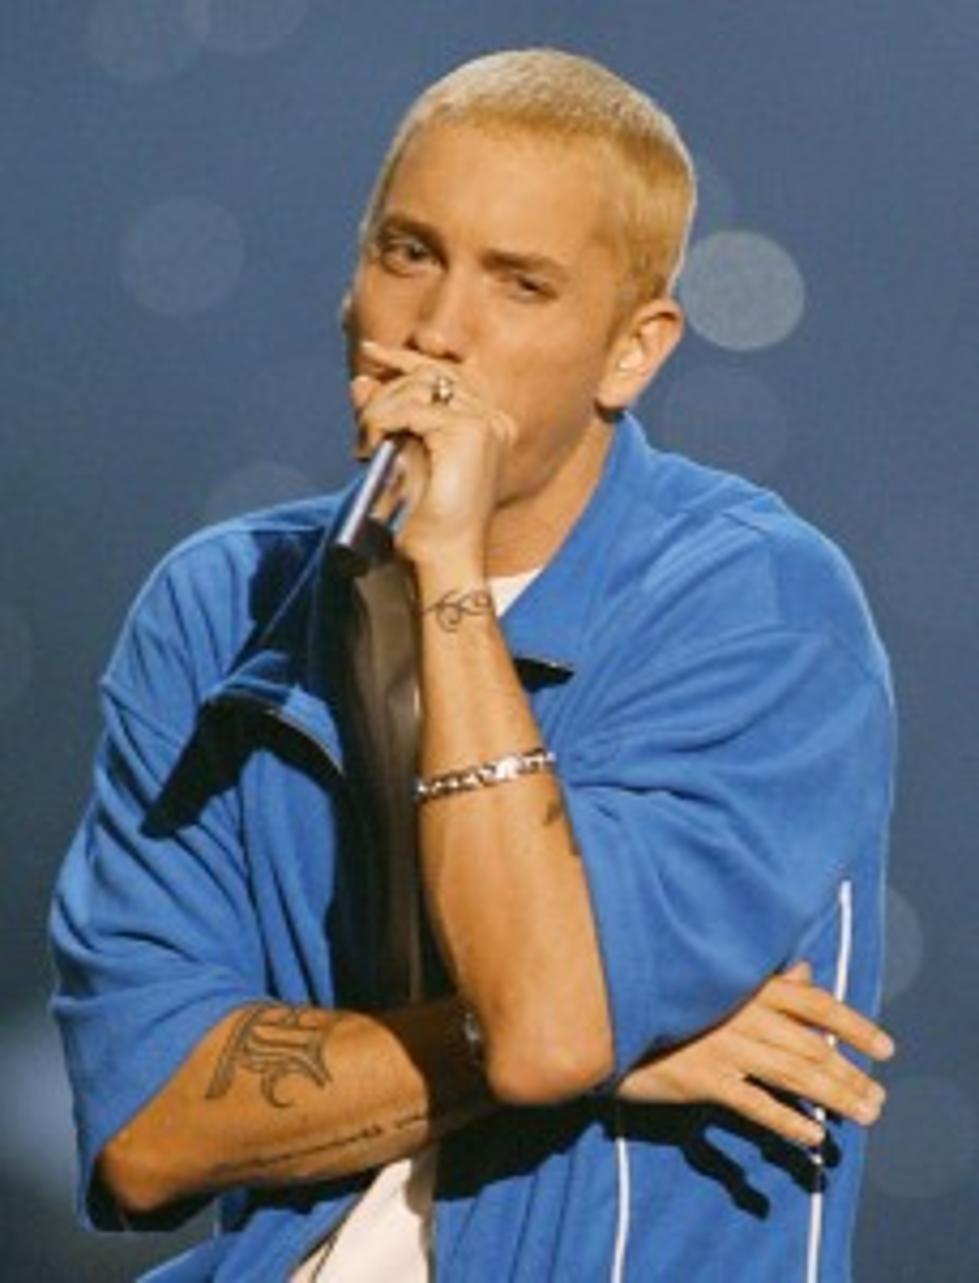 Eminem Smashes Record to Become Second Best-Selling Male Artist of All Time